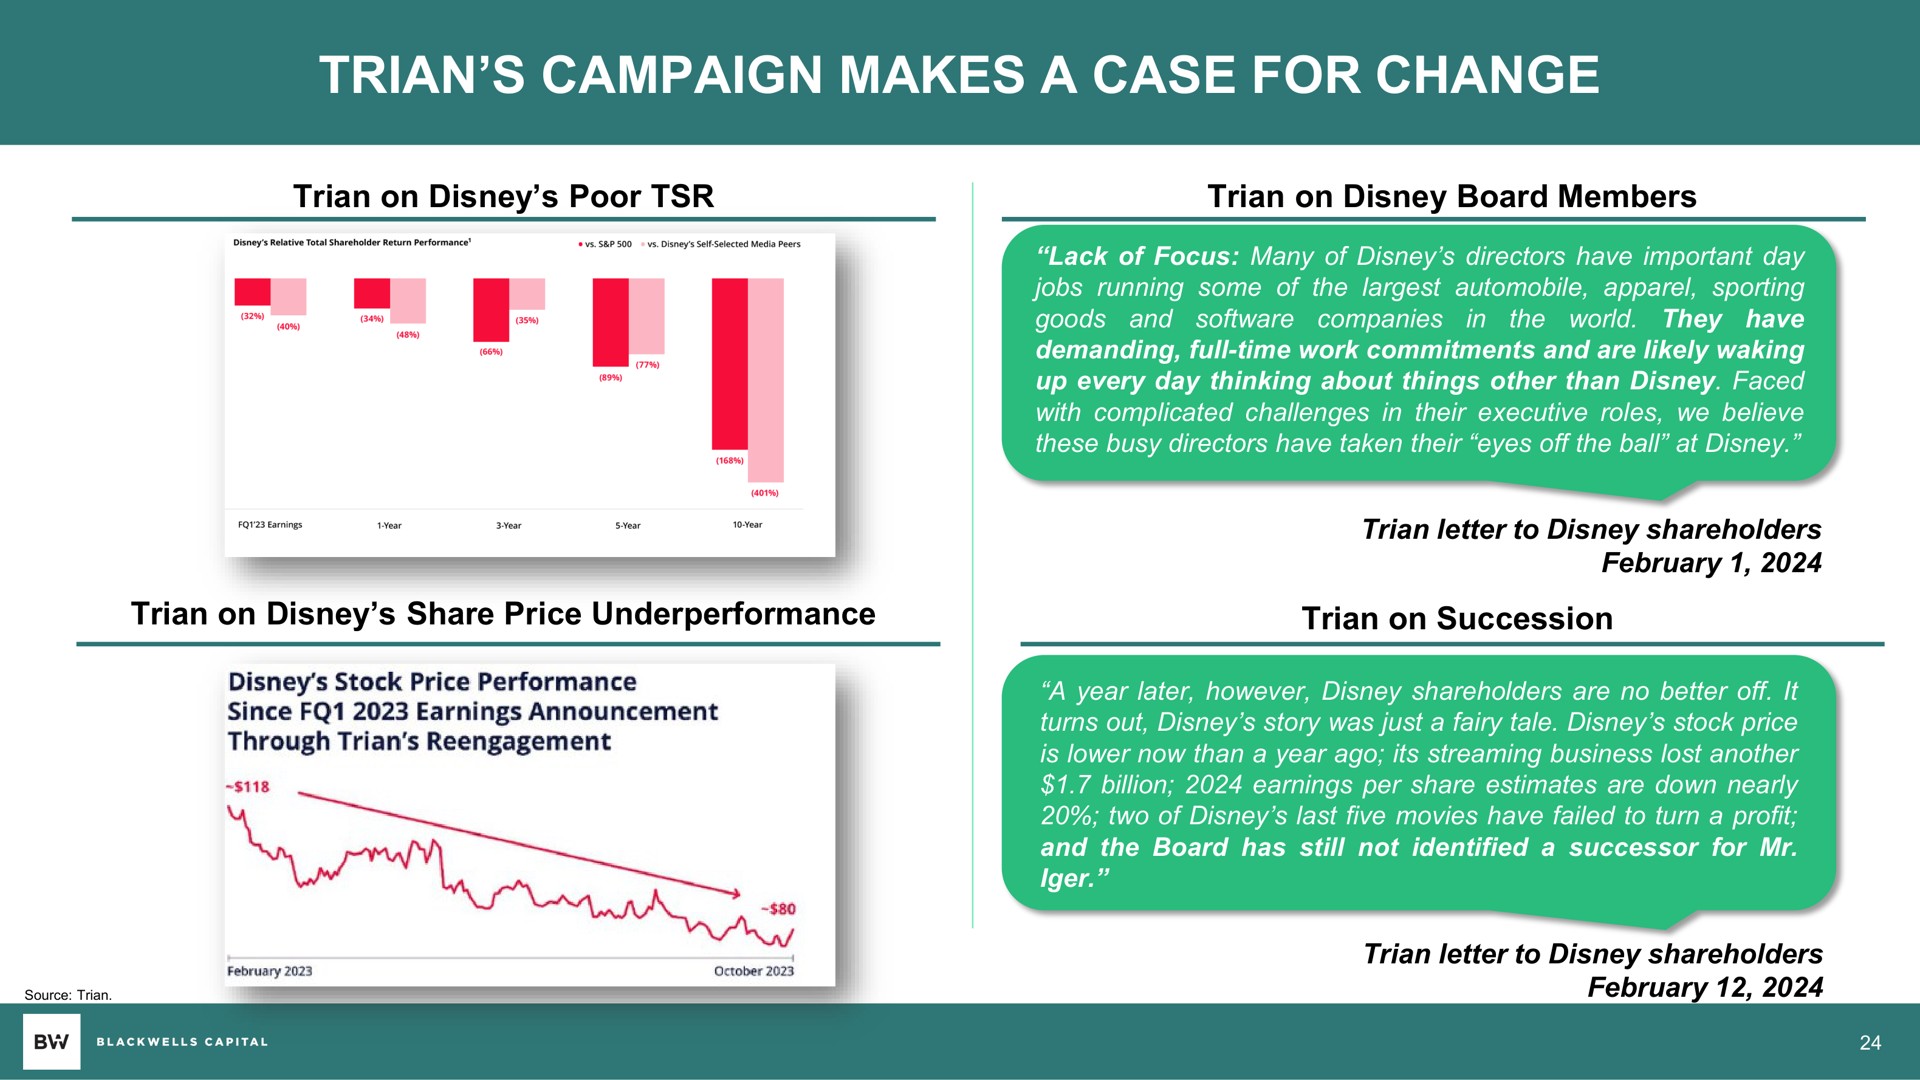 campaign makes a case for change | Blackwells Capital